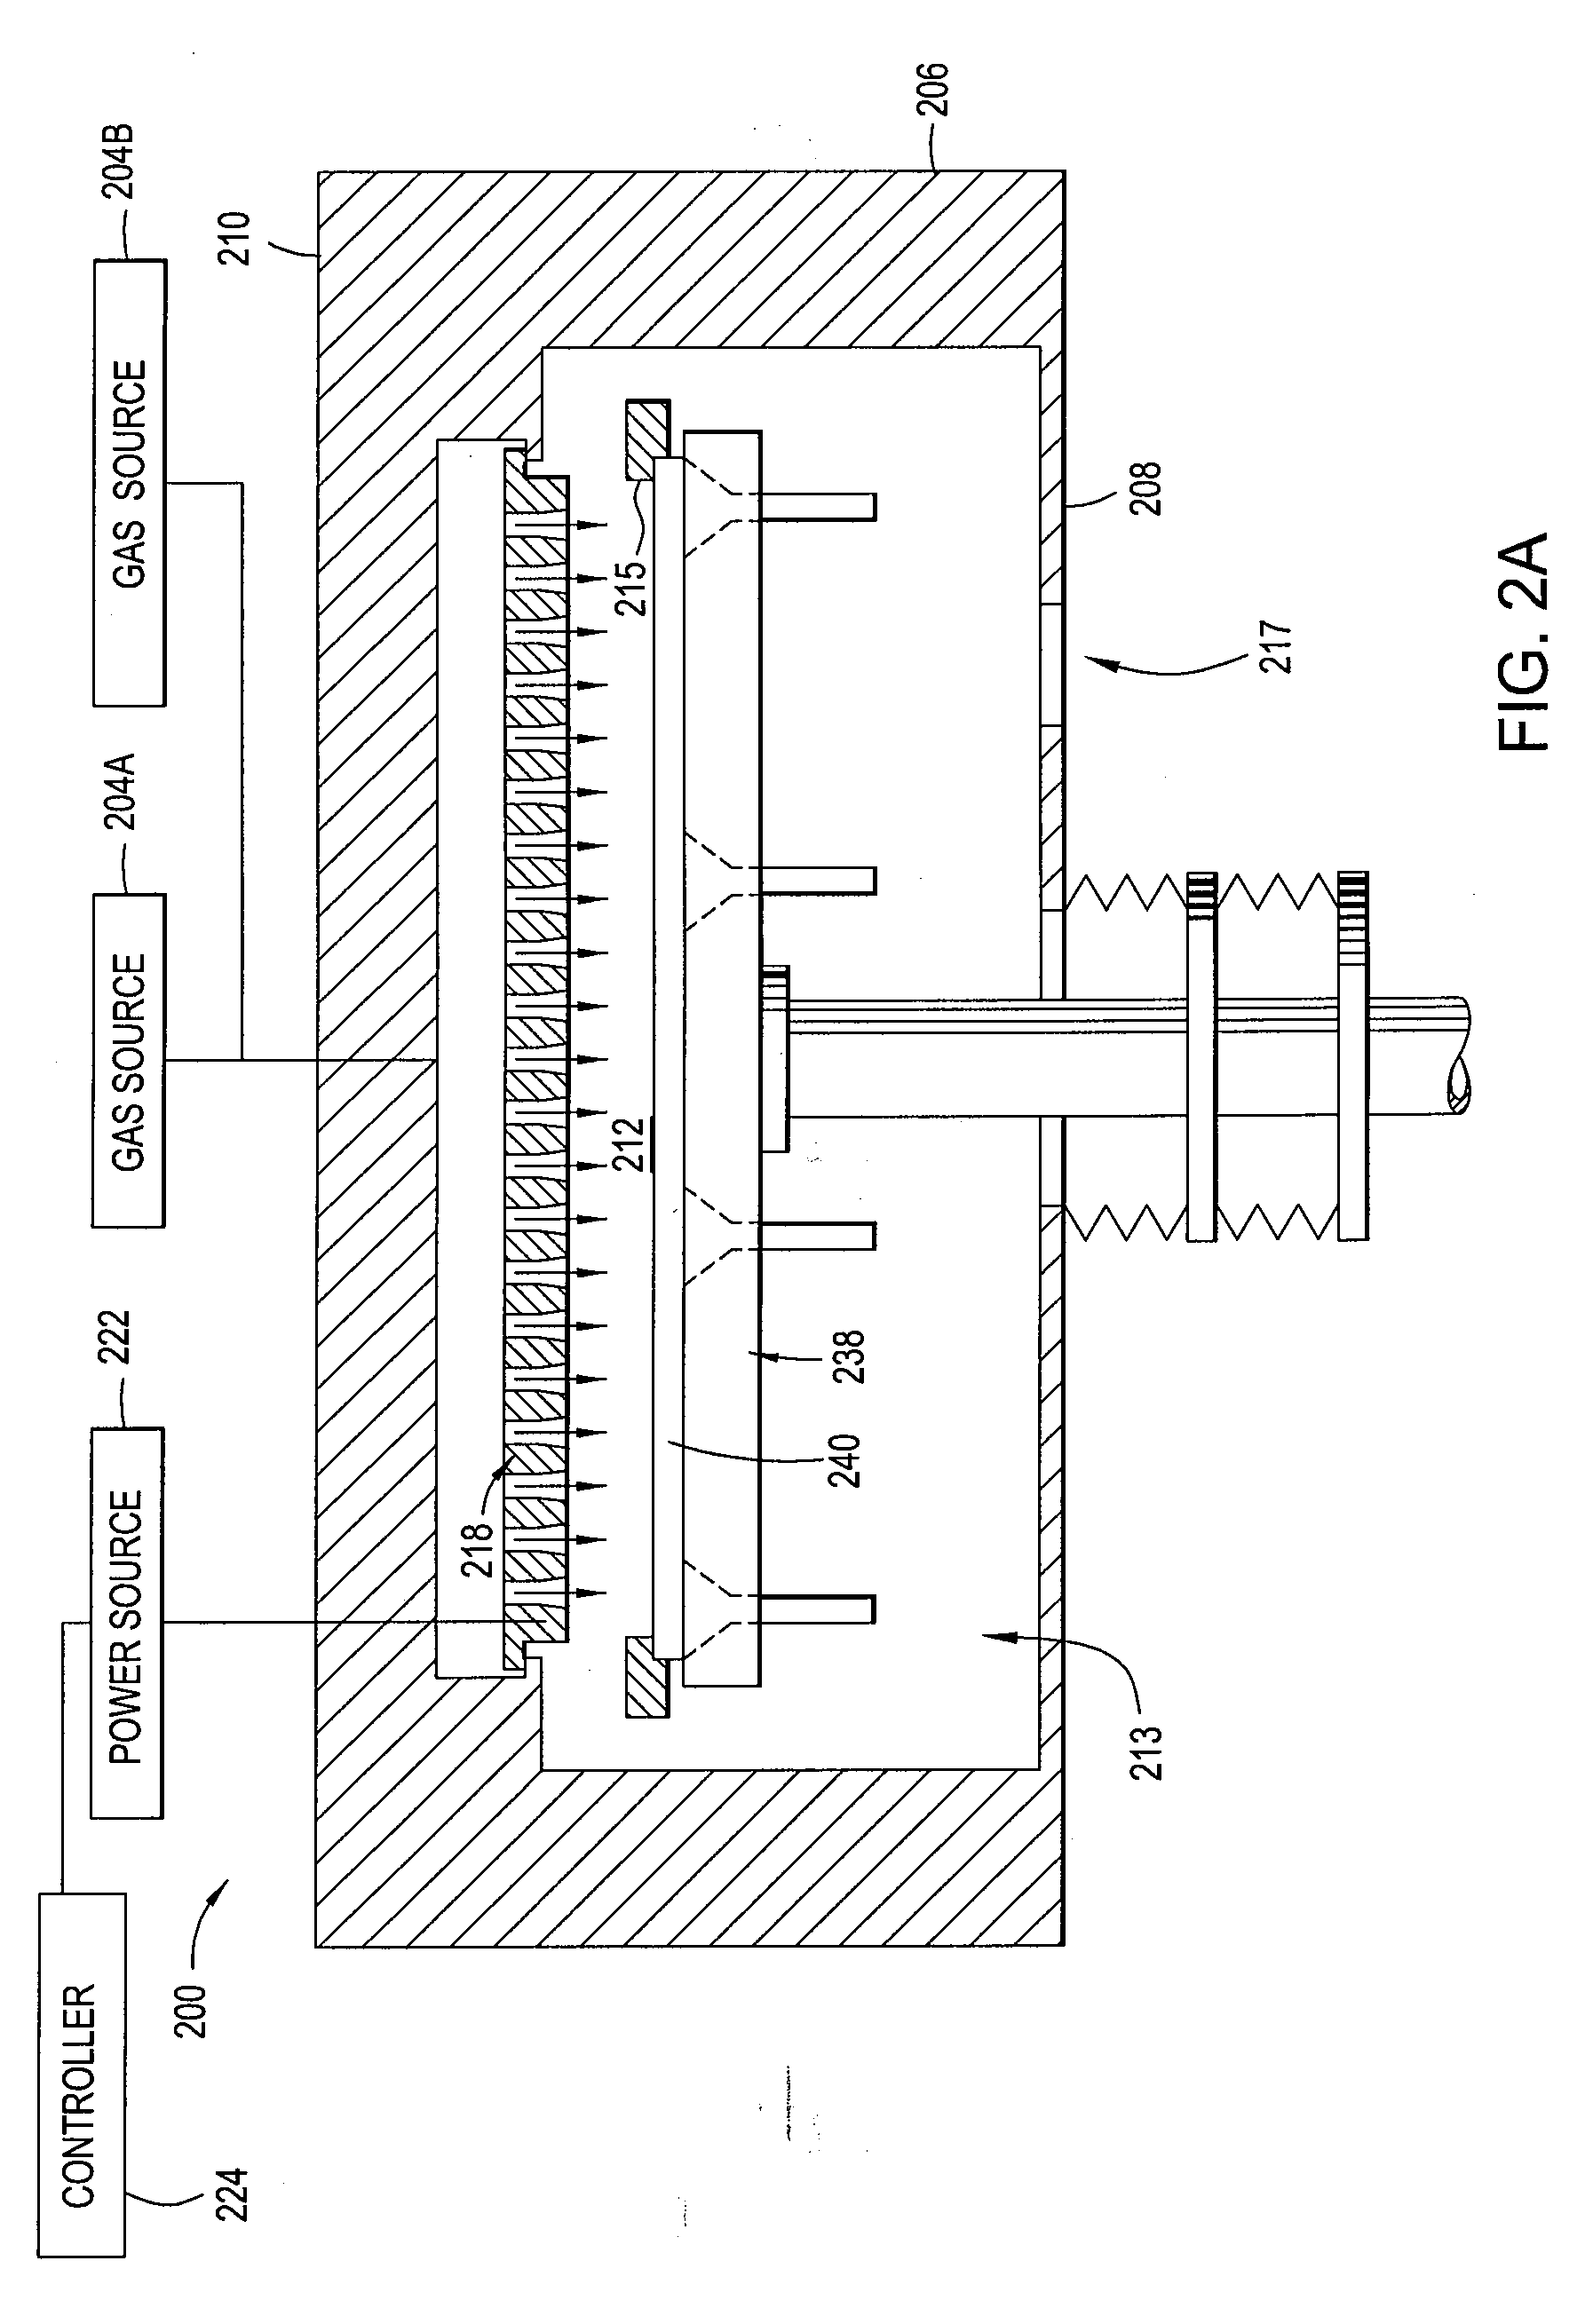 Silicon carbide for crystalline silicon solar cell surface passivation